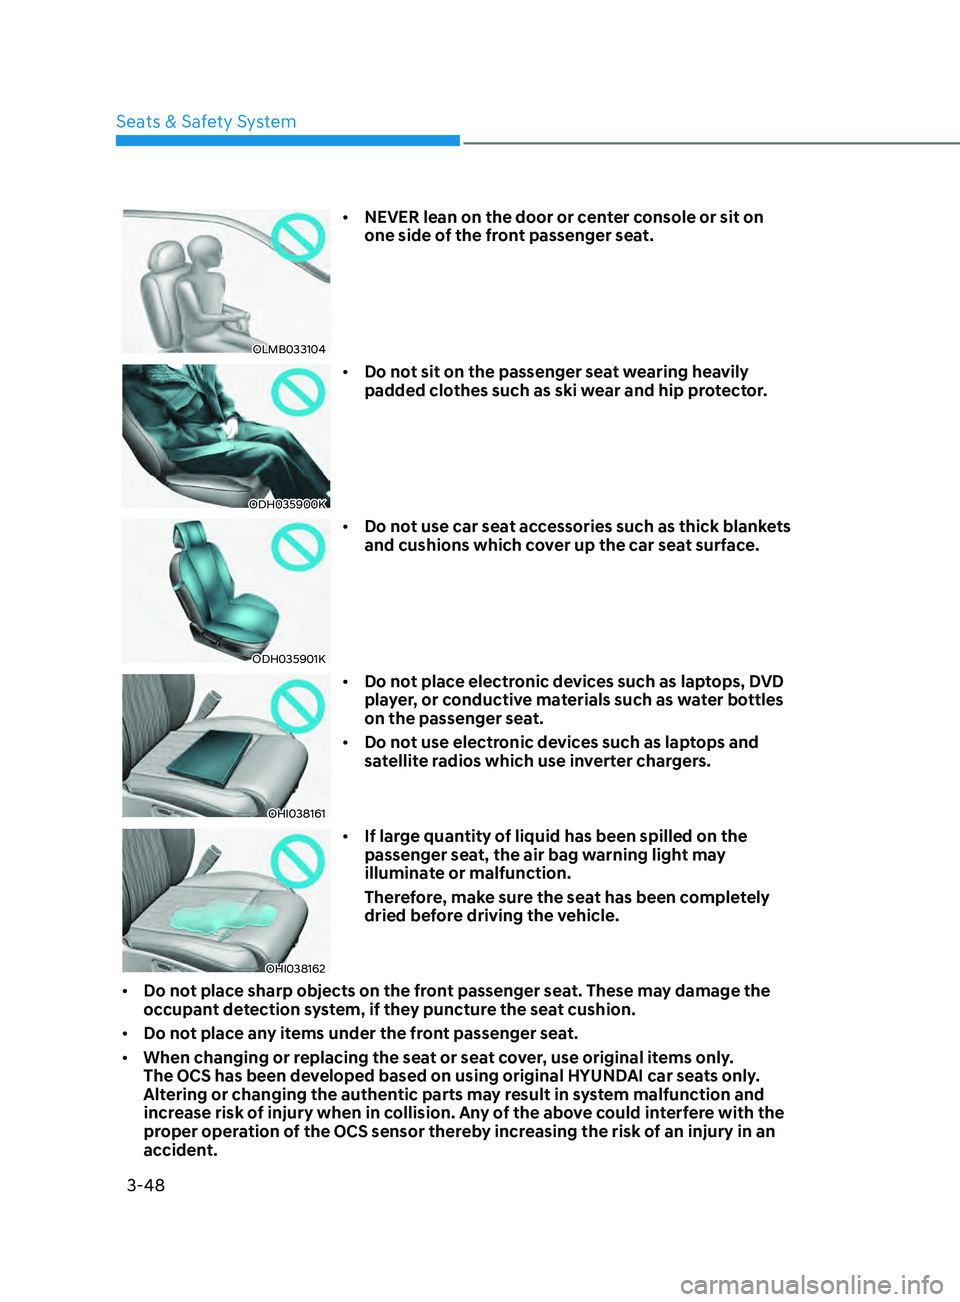 HYUNDAI ELANTRA SEL 2021  Owners Manual 3-48
OLMB033104
•	NEVER lean on the door or center console or sit on 
one side of the front passenger seat.
ODH035900K
•	Do not sit on the passenger seat wearing heavily 
padded clothes such as sk